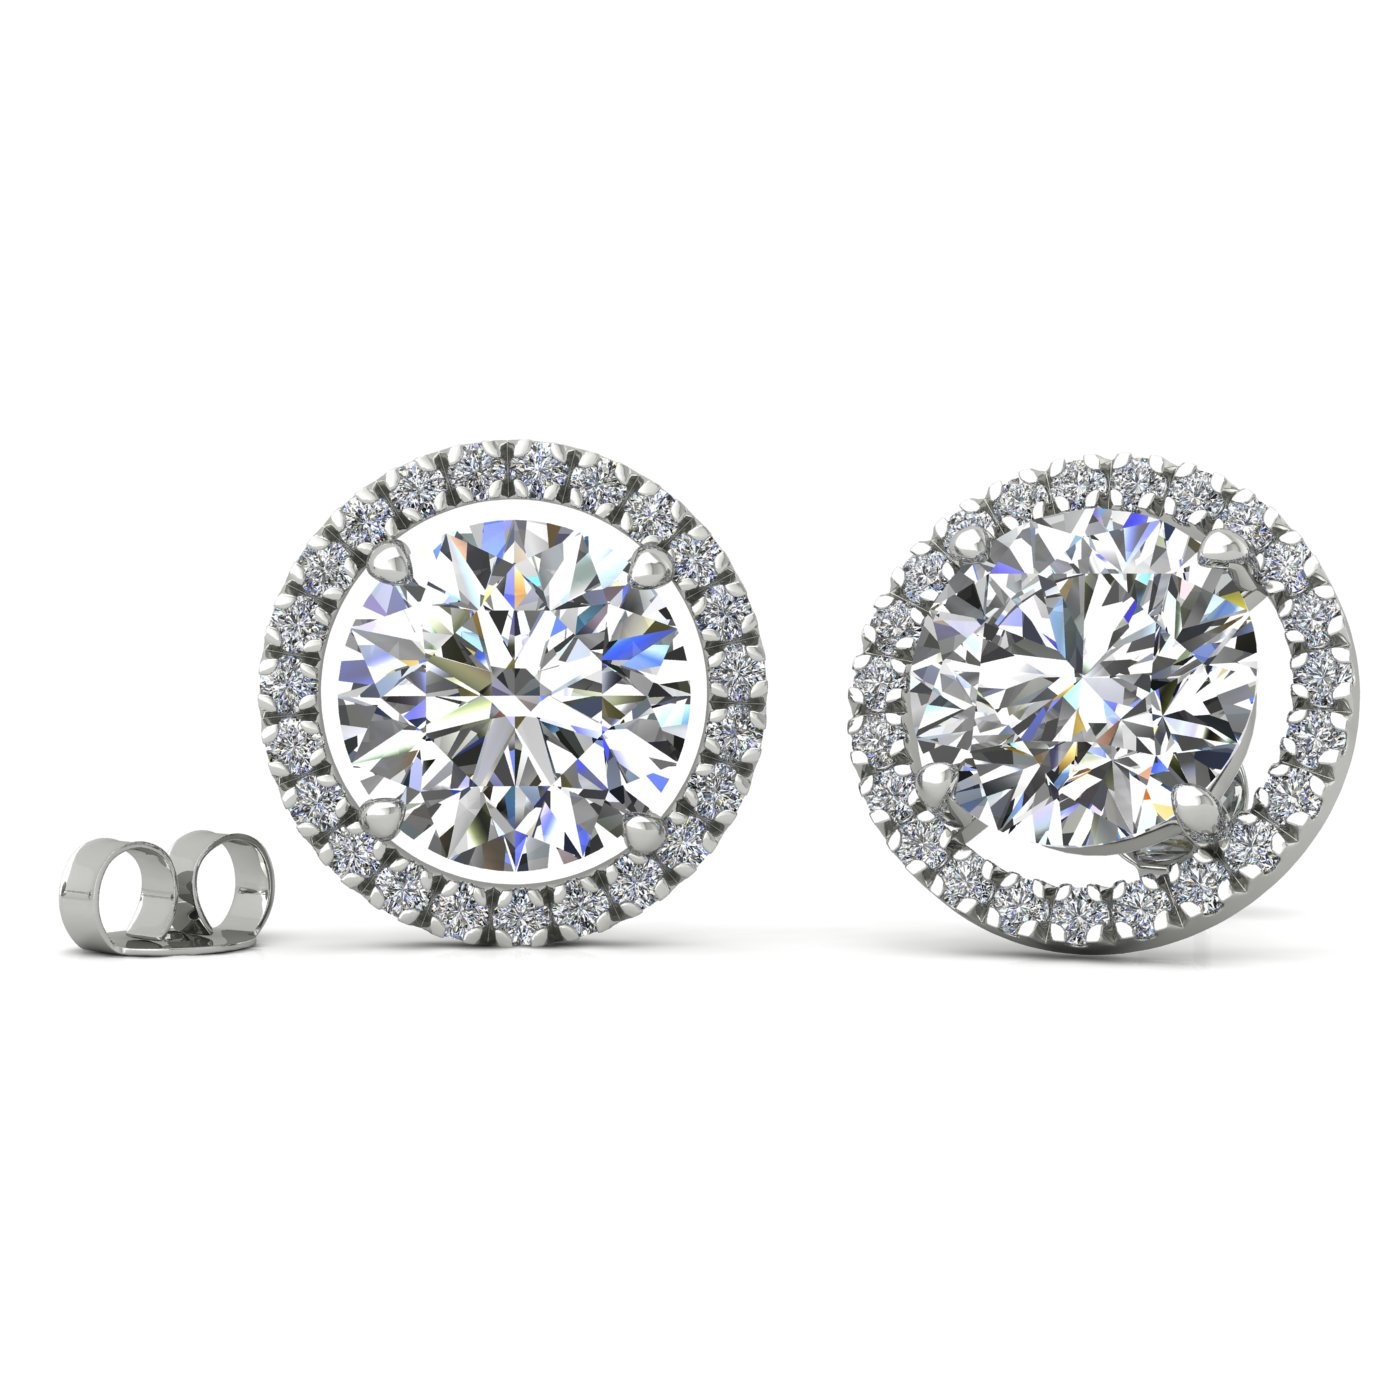 18k white gold 2 ct each (4 tcw) 4 prongs round brilliant cut halo diamond earring studs Photos & images